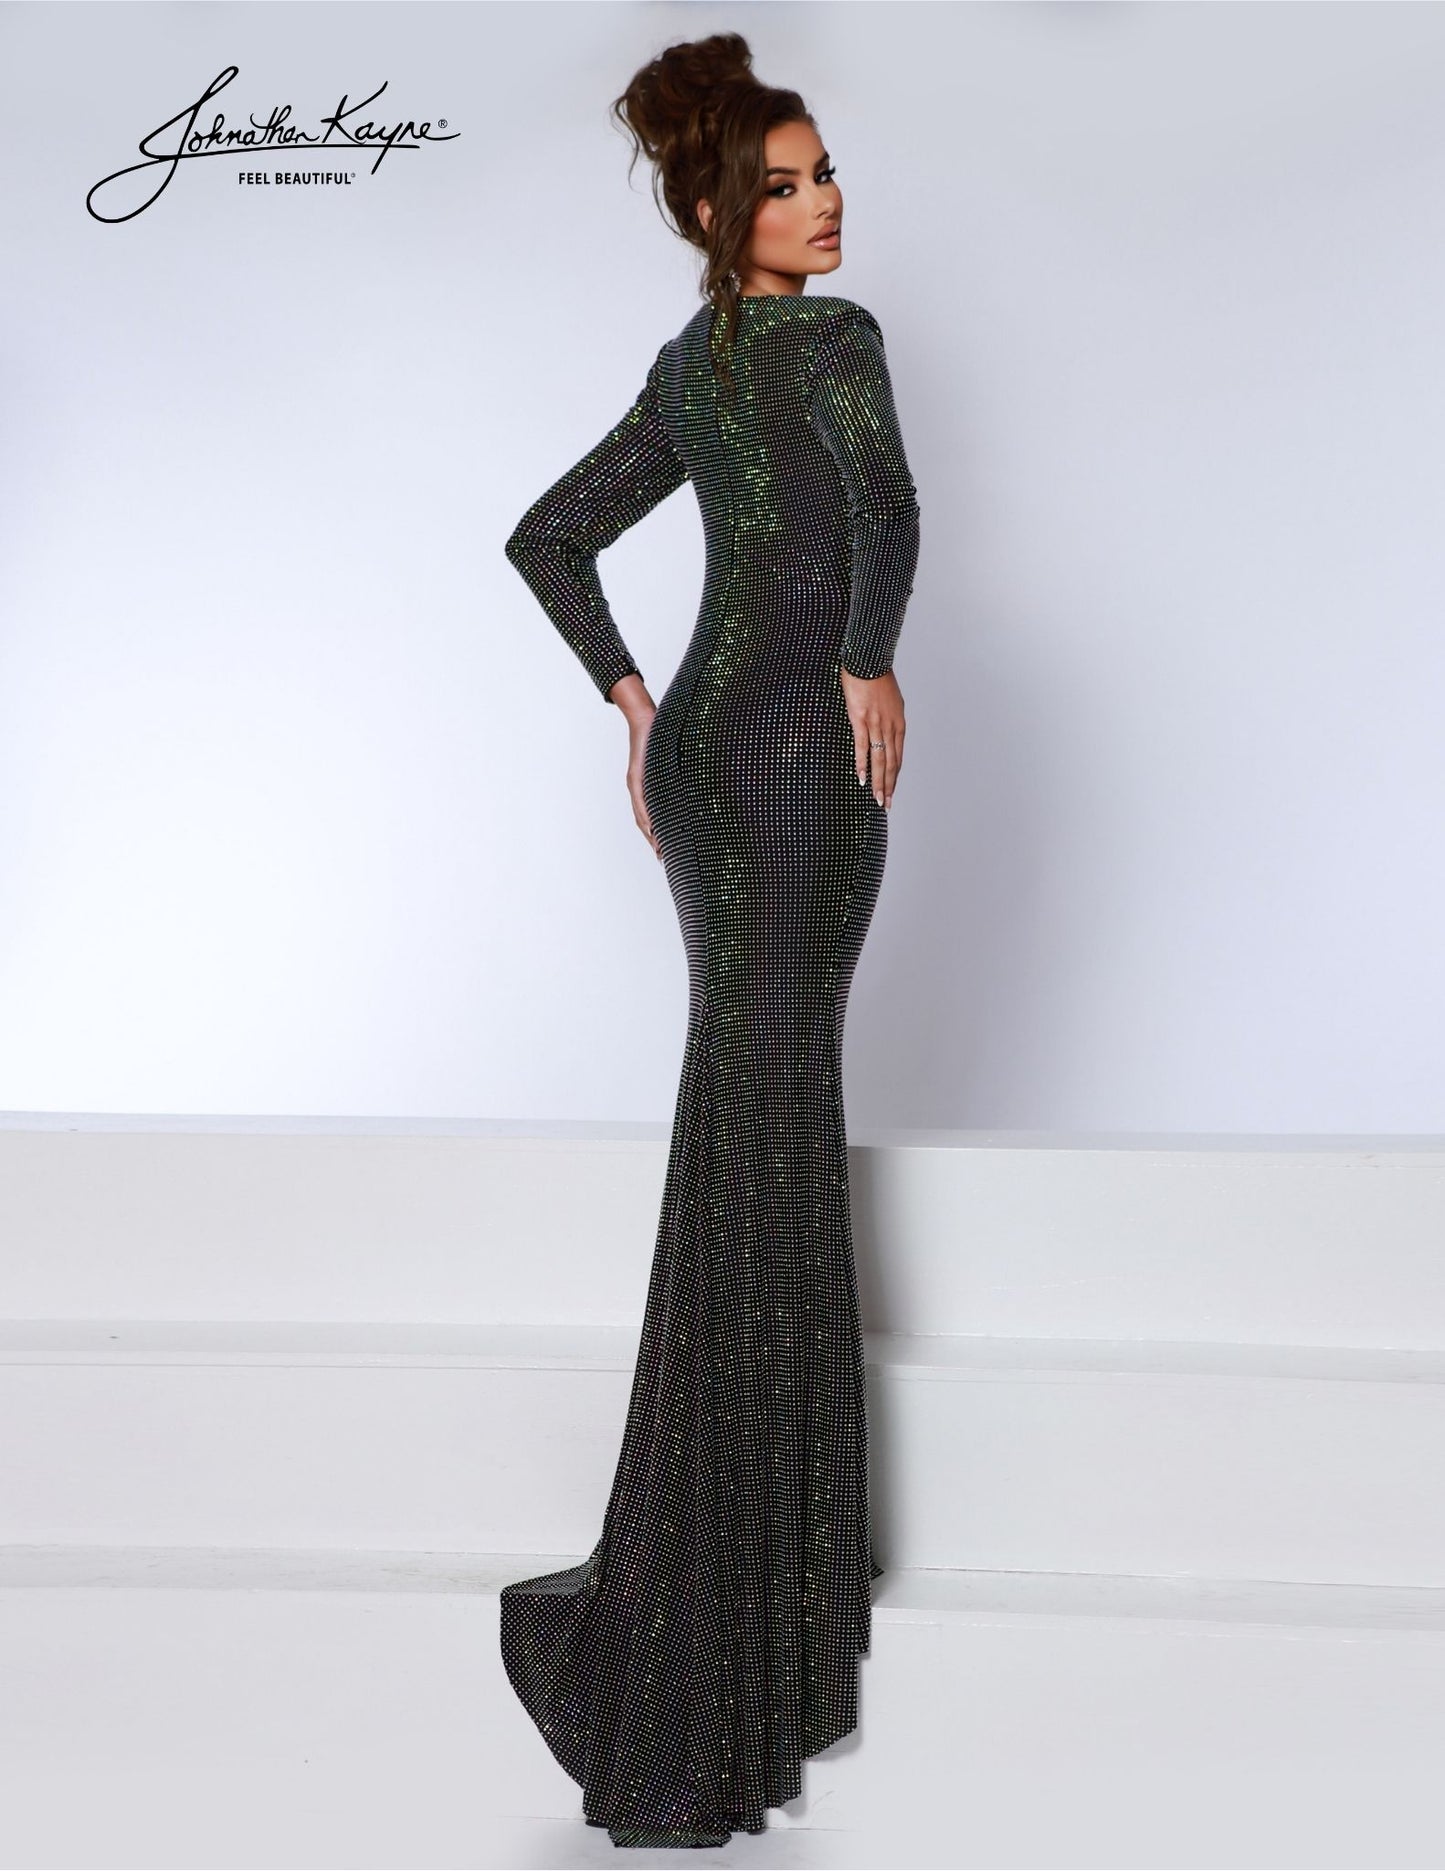 Experience elegance and sophistication with the Johnathan Kayne 2901 Crystal Studded Long Sleeve V Neck Formal Dress Ruched Gown. This stunning gown features a crystal-studded bodice, long sleeves, and a v-neckline for a classic and timeless look. The ruched gown adds a touch of femininity and elegance, making it the perfect choice for any formal occasion. With its superior design and high-quality construction, this dress is sure to make you stand out and leave a lasting impression. 